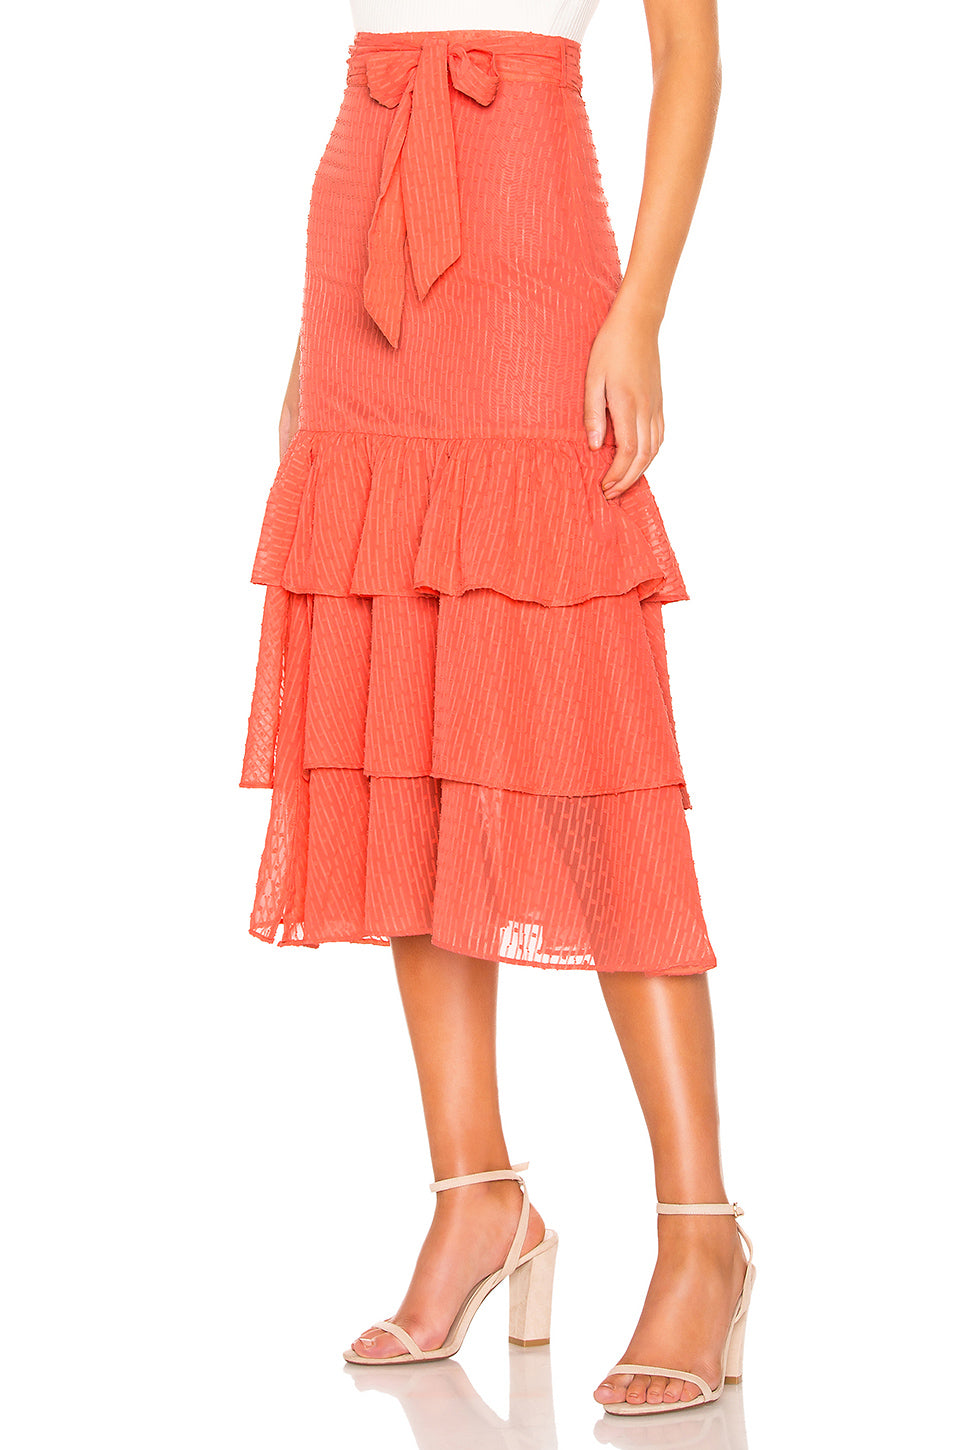 Copeland Skirt in CORAL